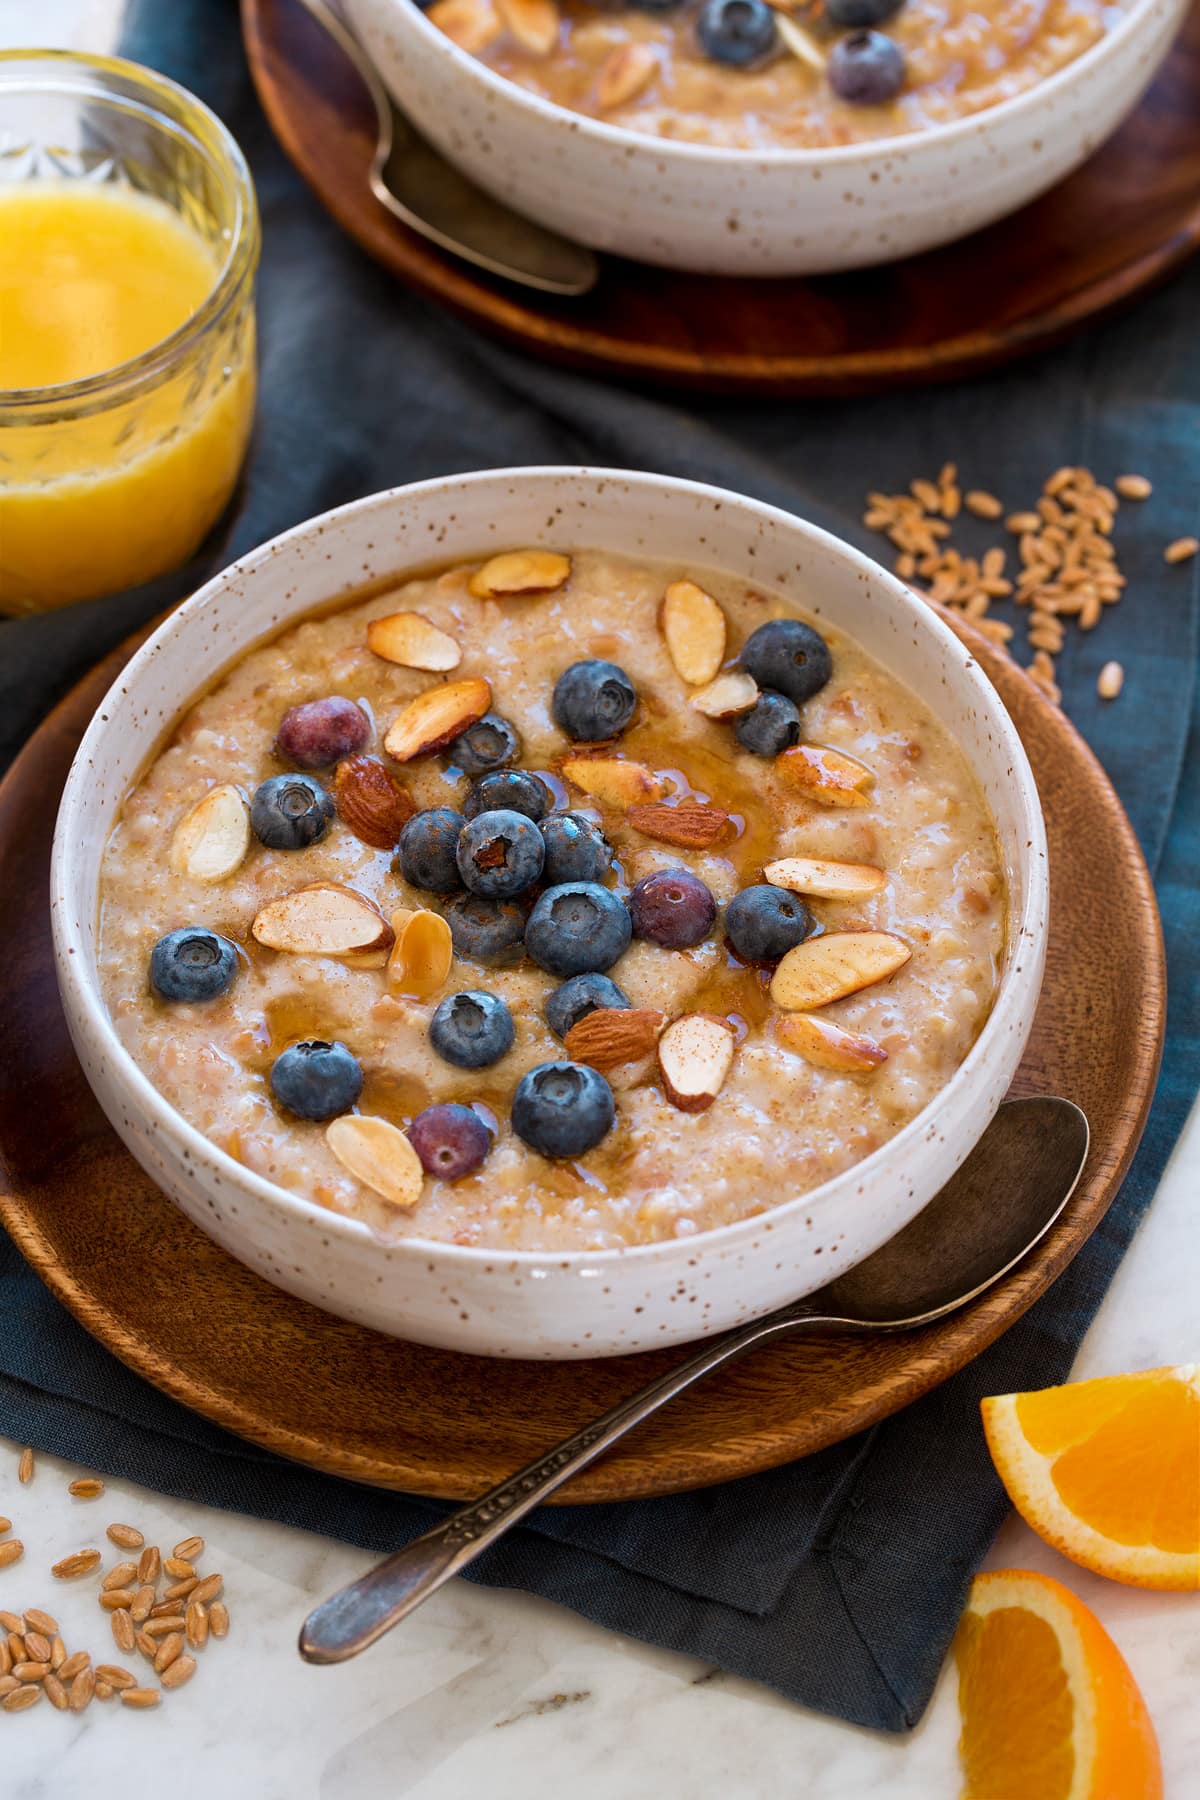 Multigrain porridge made with steel cut oats, farro and amaranth. It is shown served with fresh blueberries, sliced almond and maple syrup.